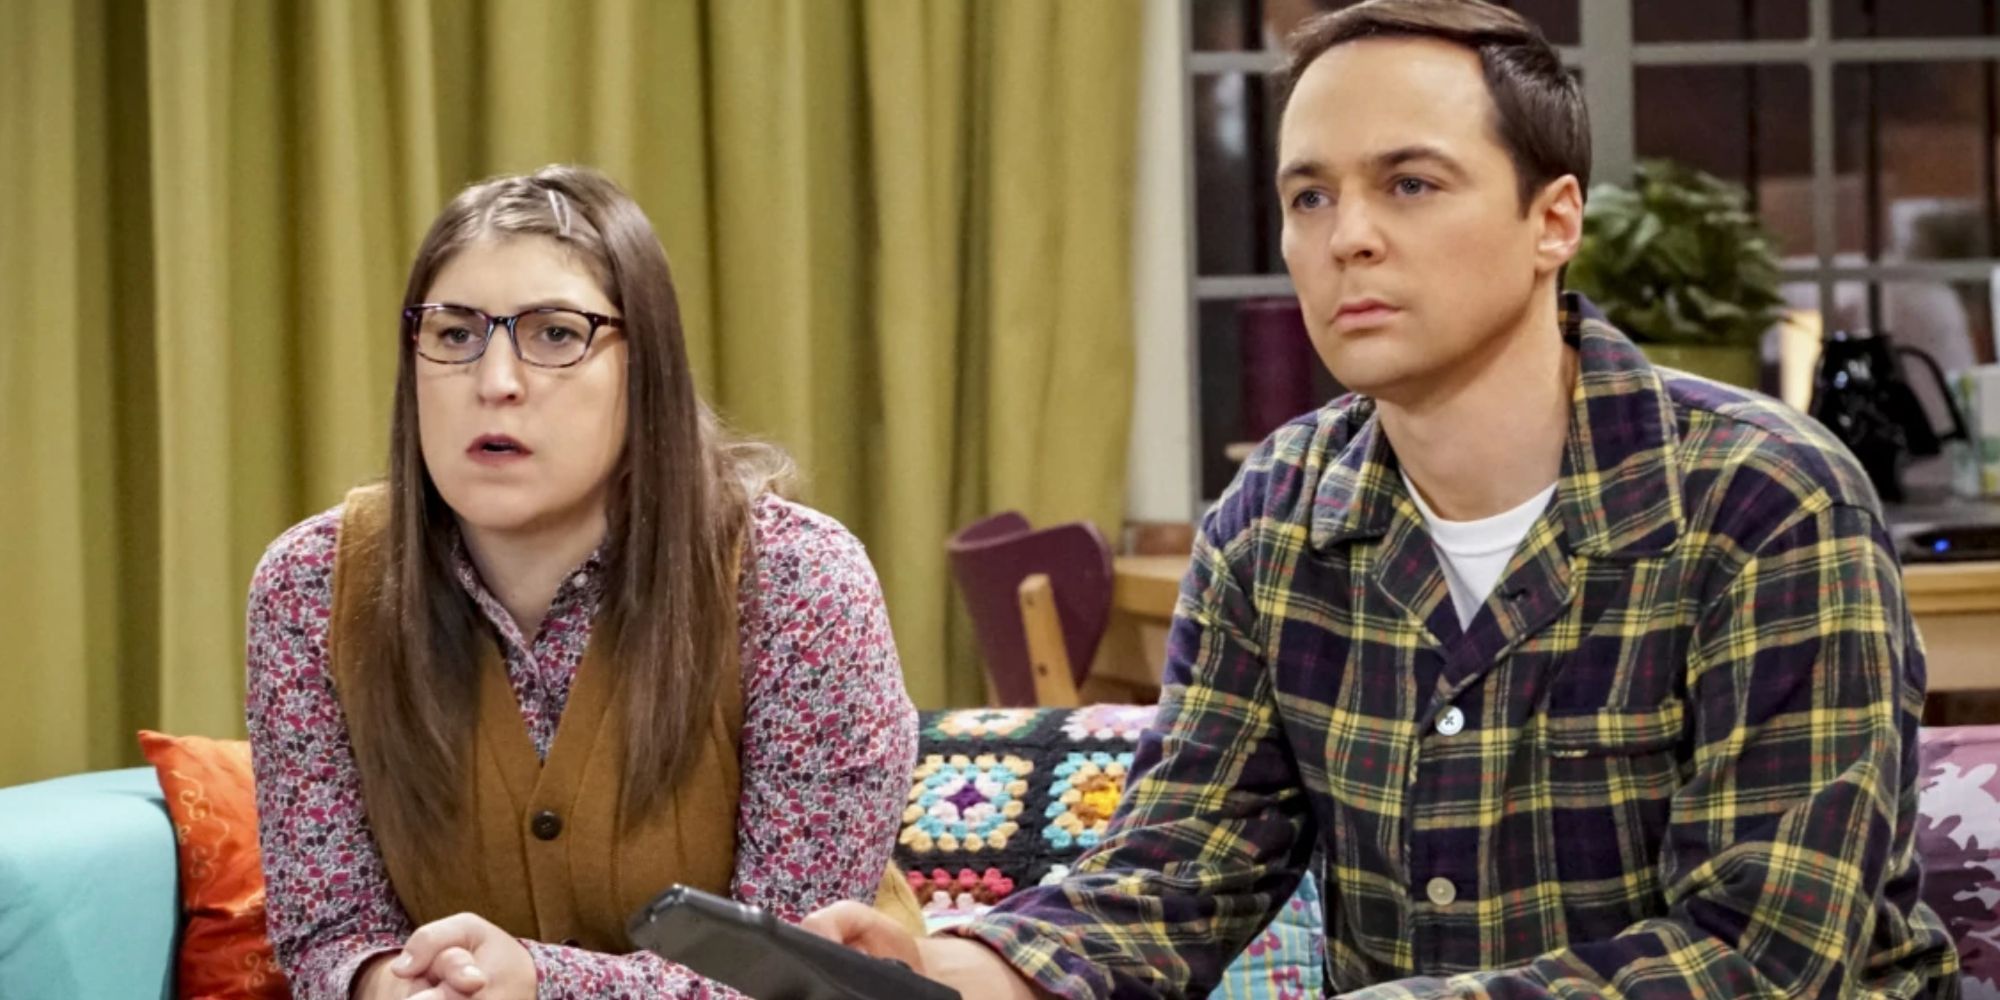 Sheldon and Amy watching TV in the Big Bang Theory